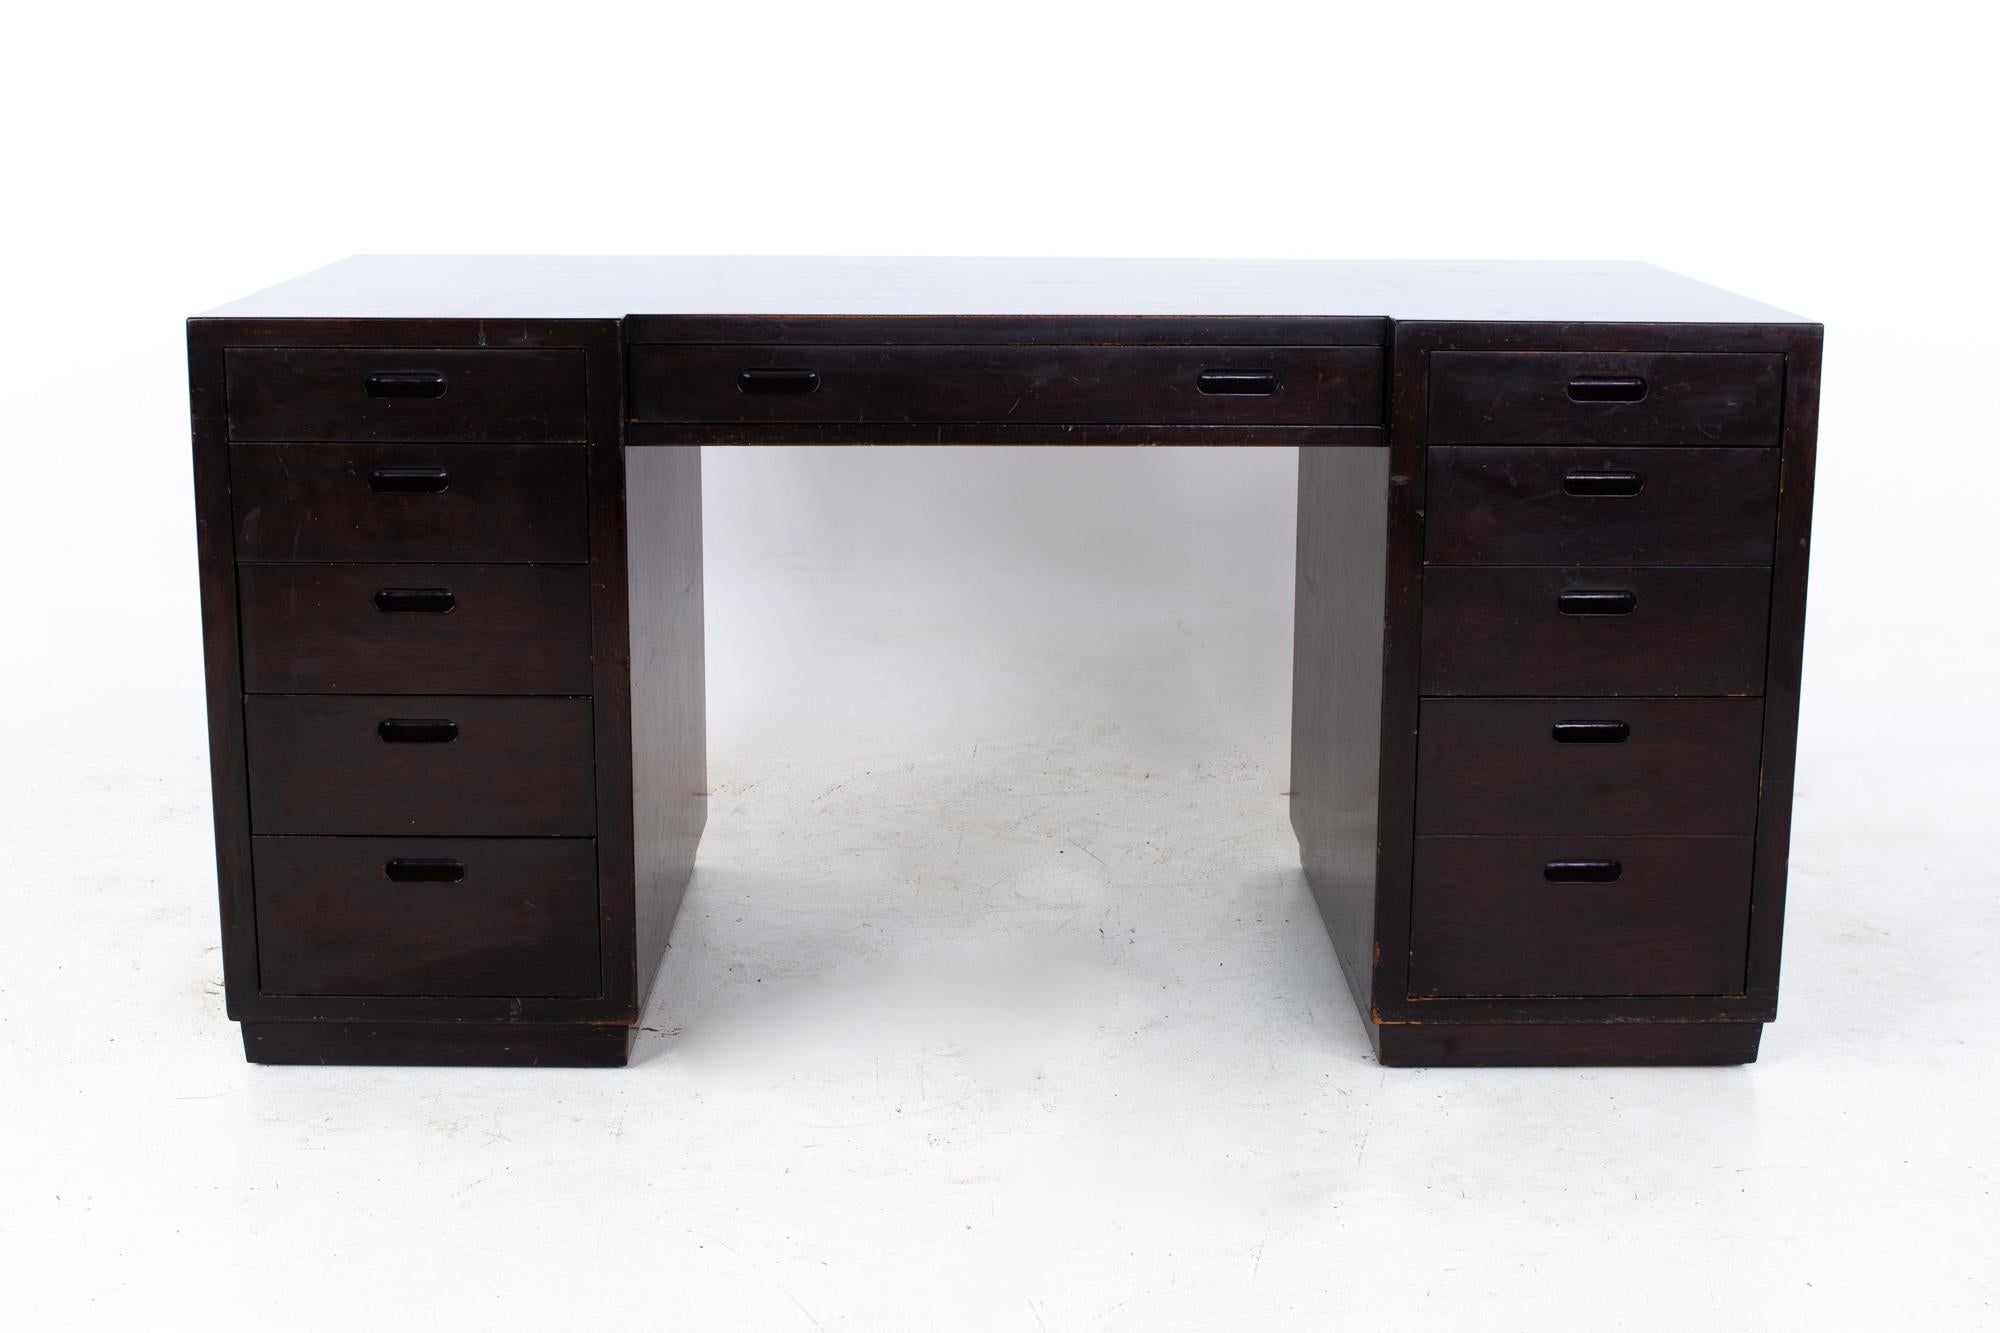 Edward Wormley for Dunbar mid century executive desk
Desk measures: 60 wide x 27 deep x 29.25 inches high with a chair clearance of 24.5 inches

All pieces of furniture can be had in what we call restored vintage condition. That means the piece